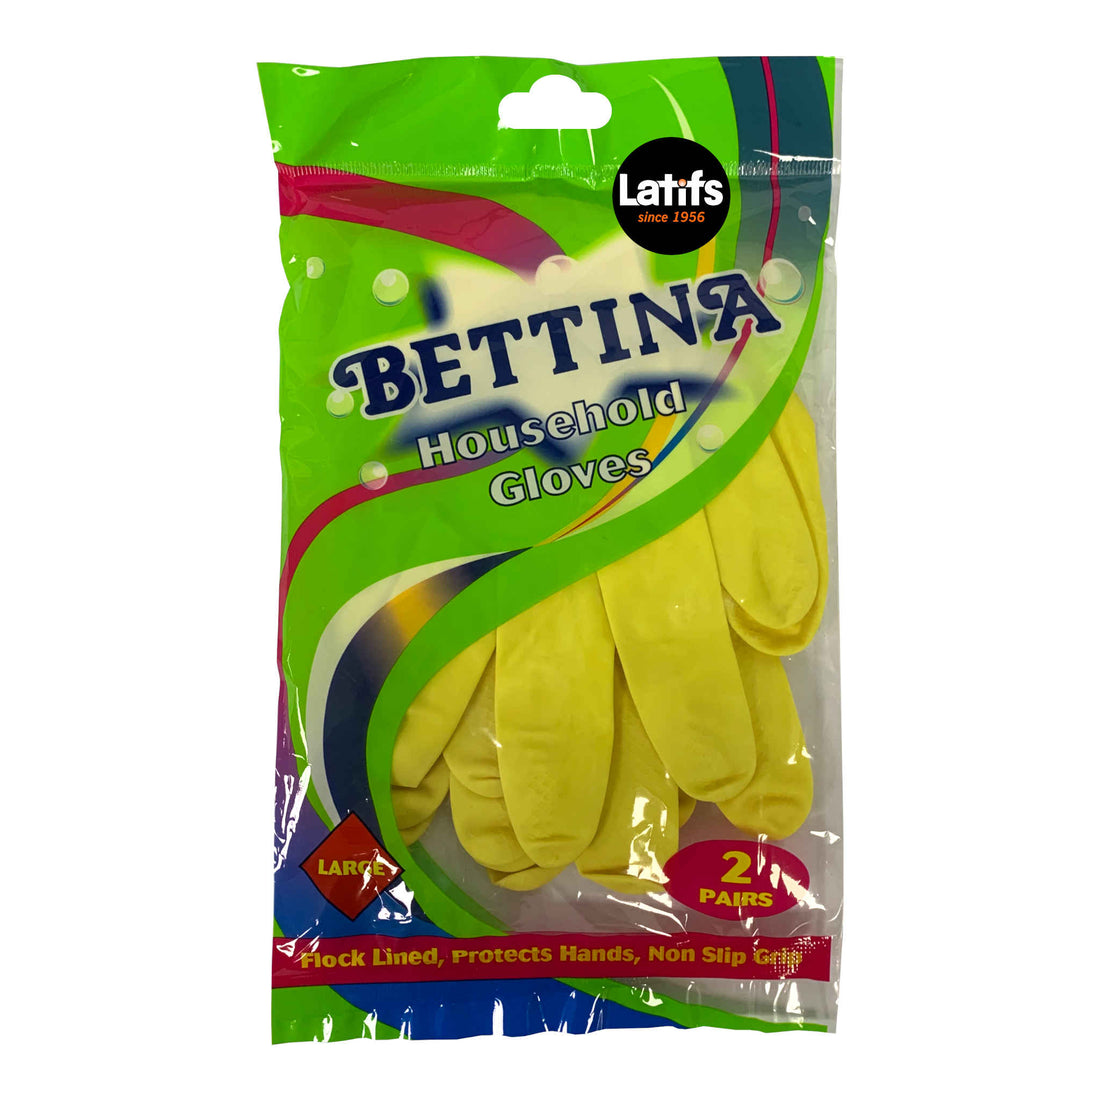 Bettina Household Gloves | Large | 2 Pack